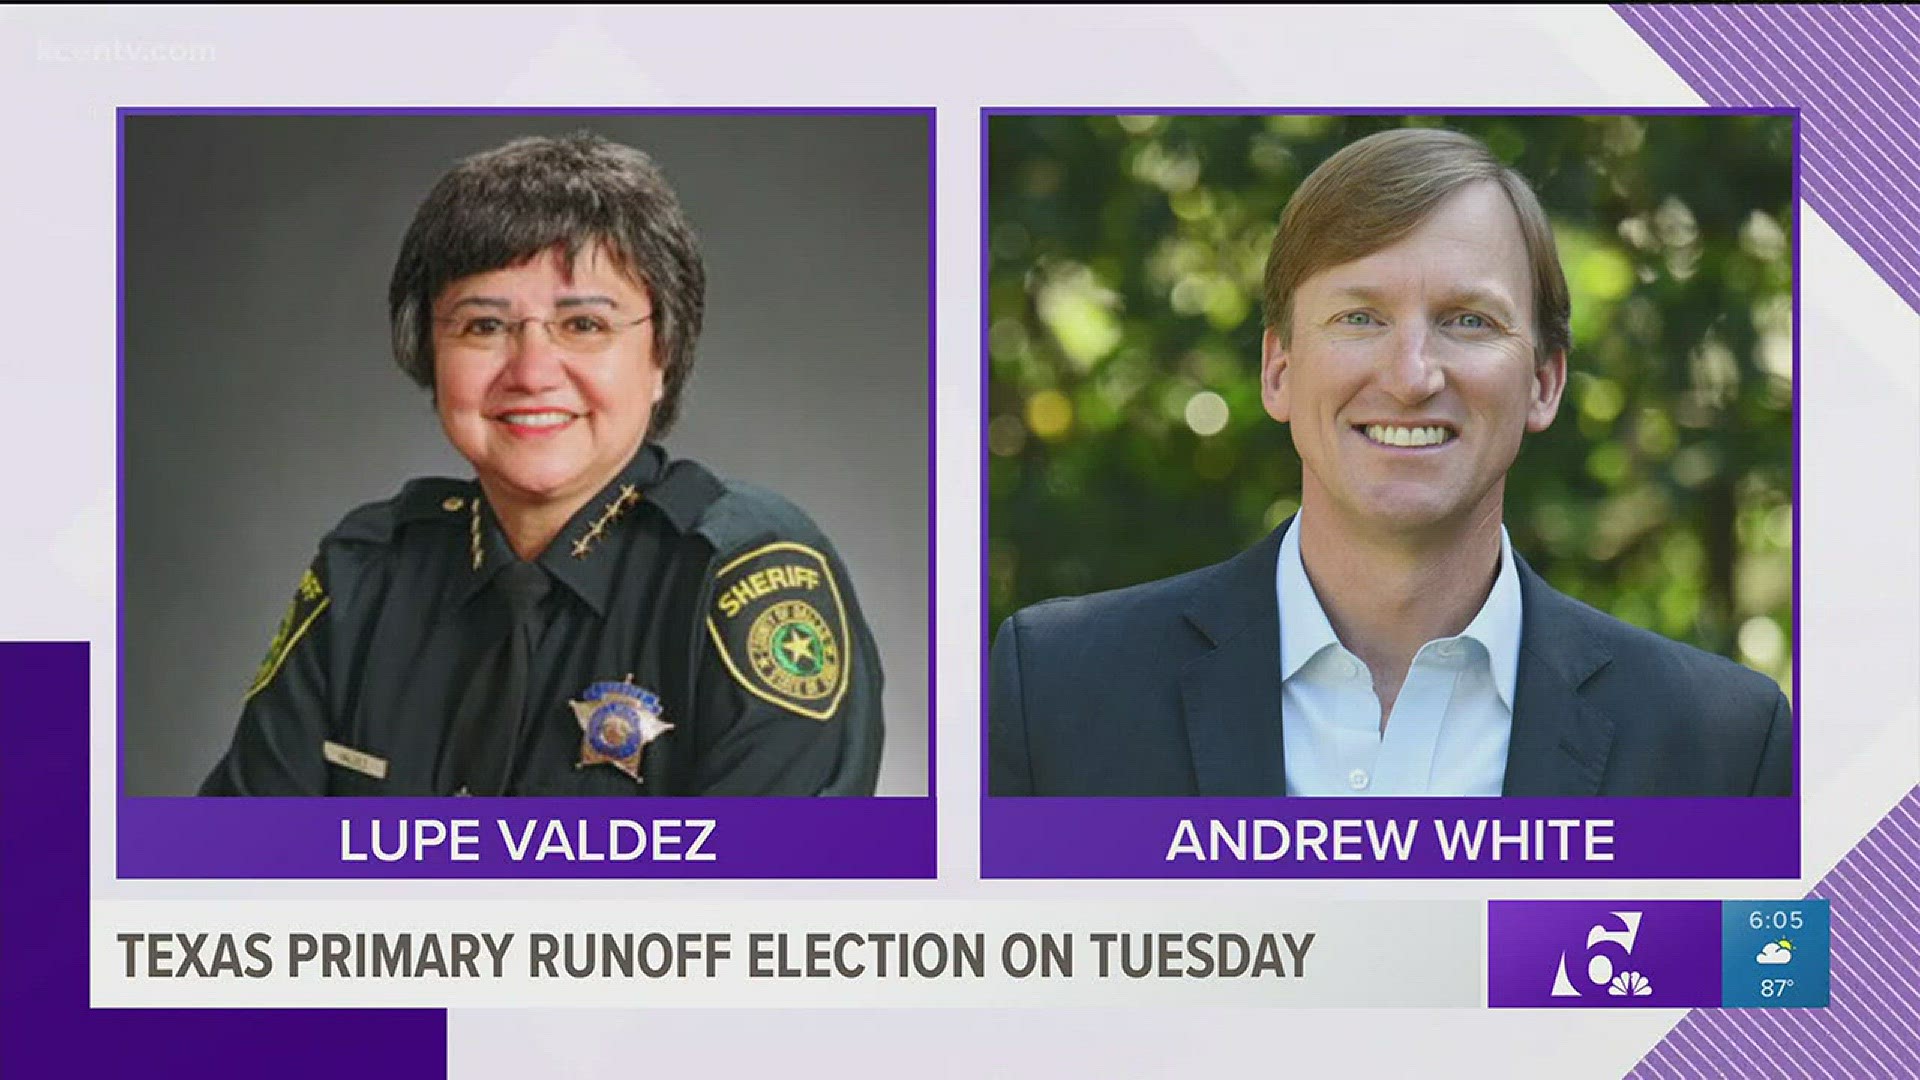 The Texas Primary Runoff election is tomorrow.